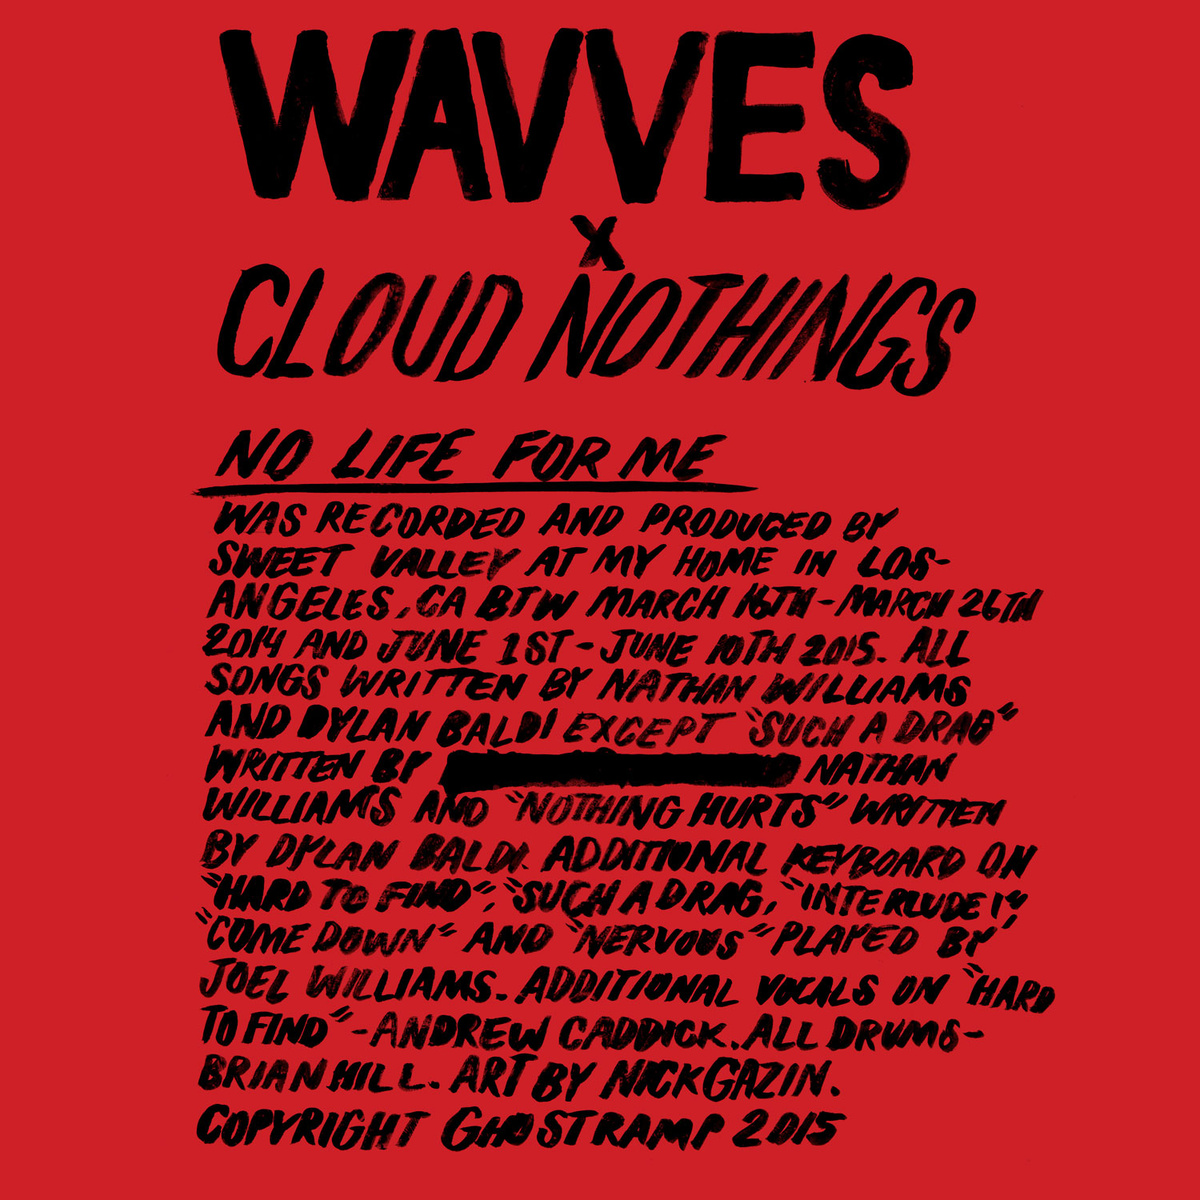 Song of The Week: “Come Down” by Wavves x Cloud Nothings